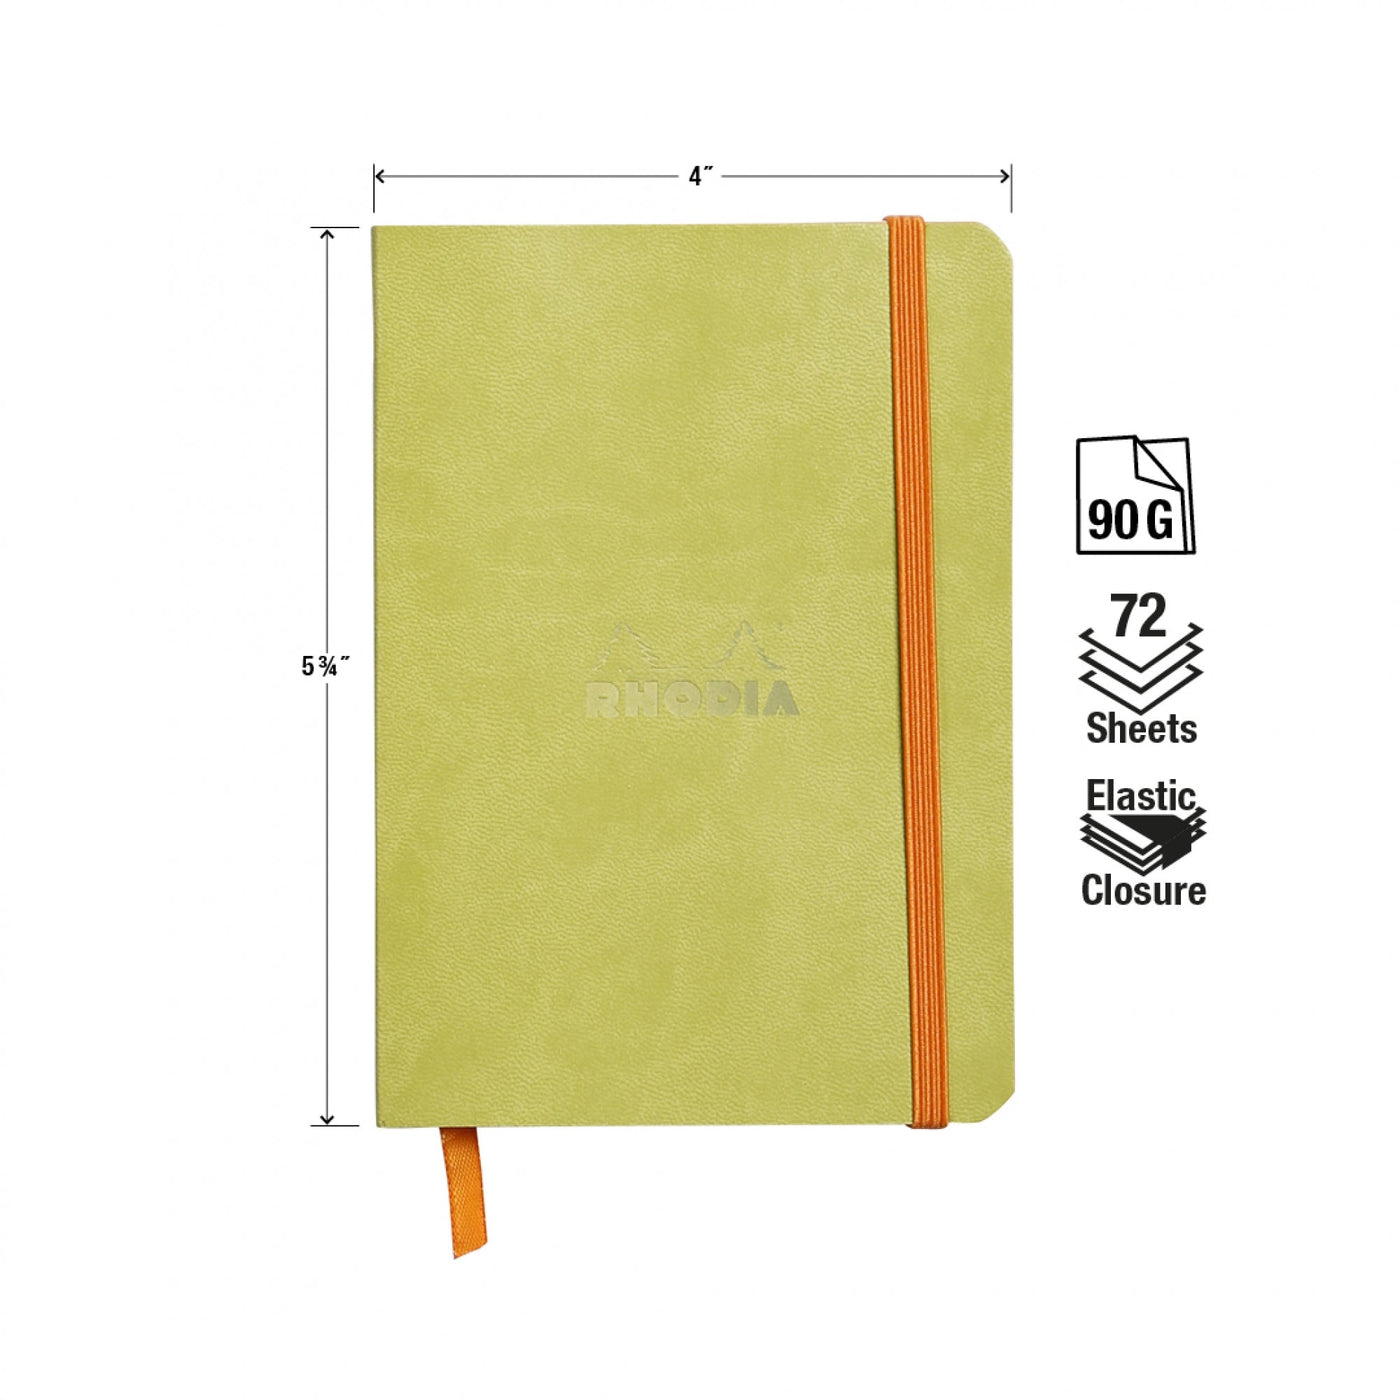 Rhodia Rhodiarama Anise A6 Soft Cover Dotted Notebook Measurements